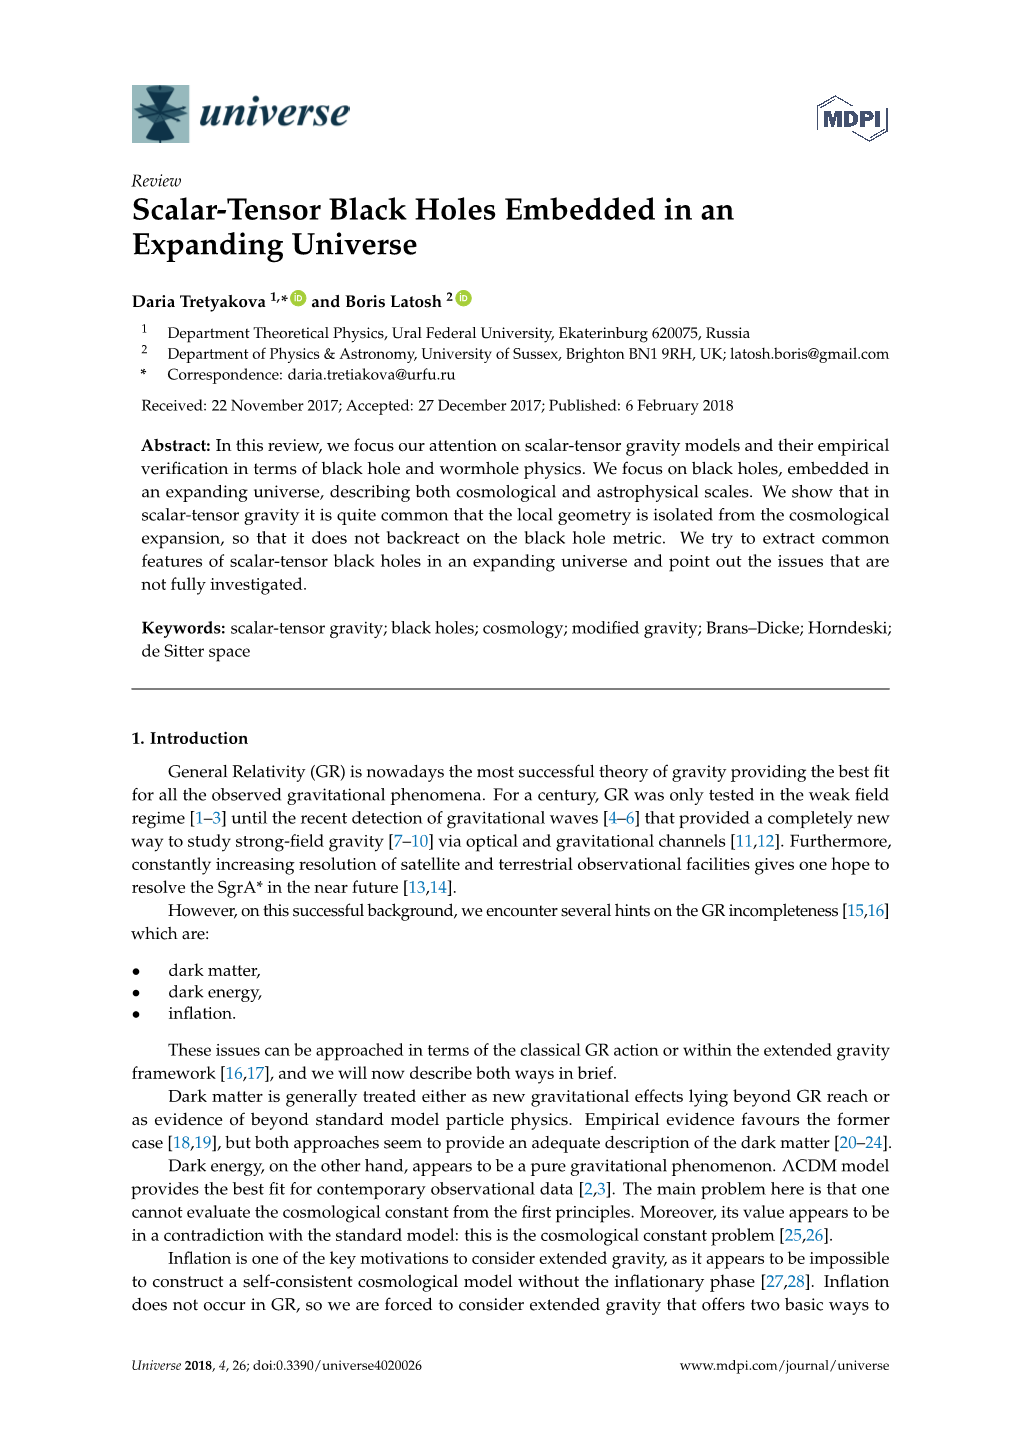 Scalar-Tensor Black Holes Embedded in an Expanding Universe